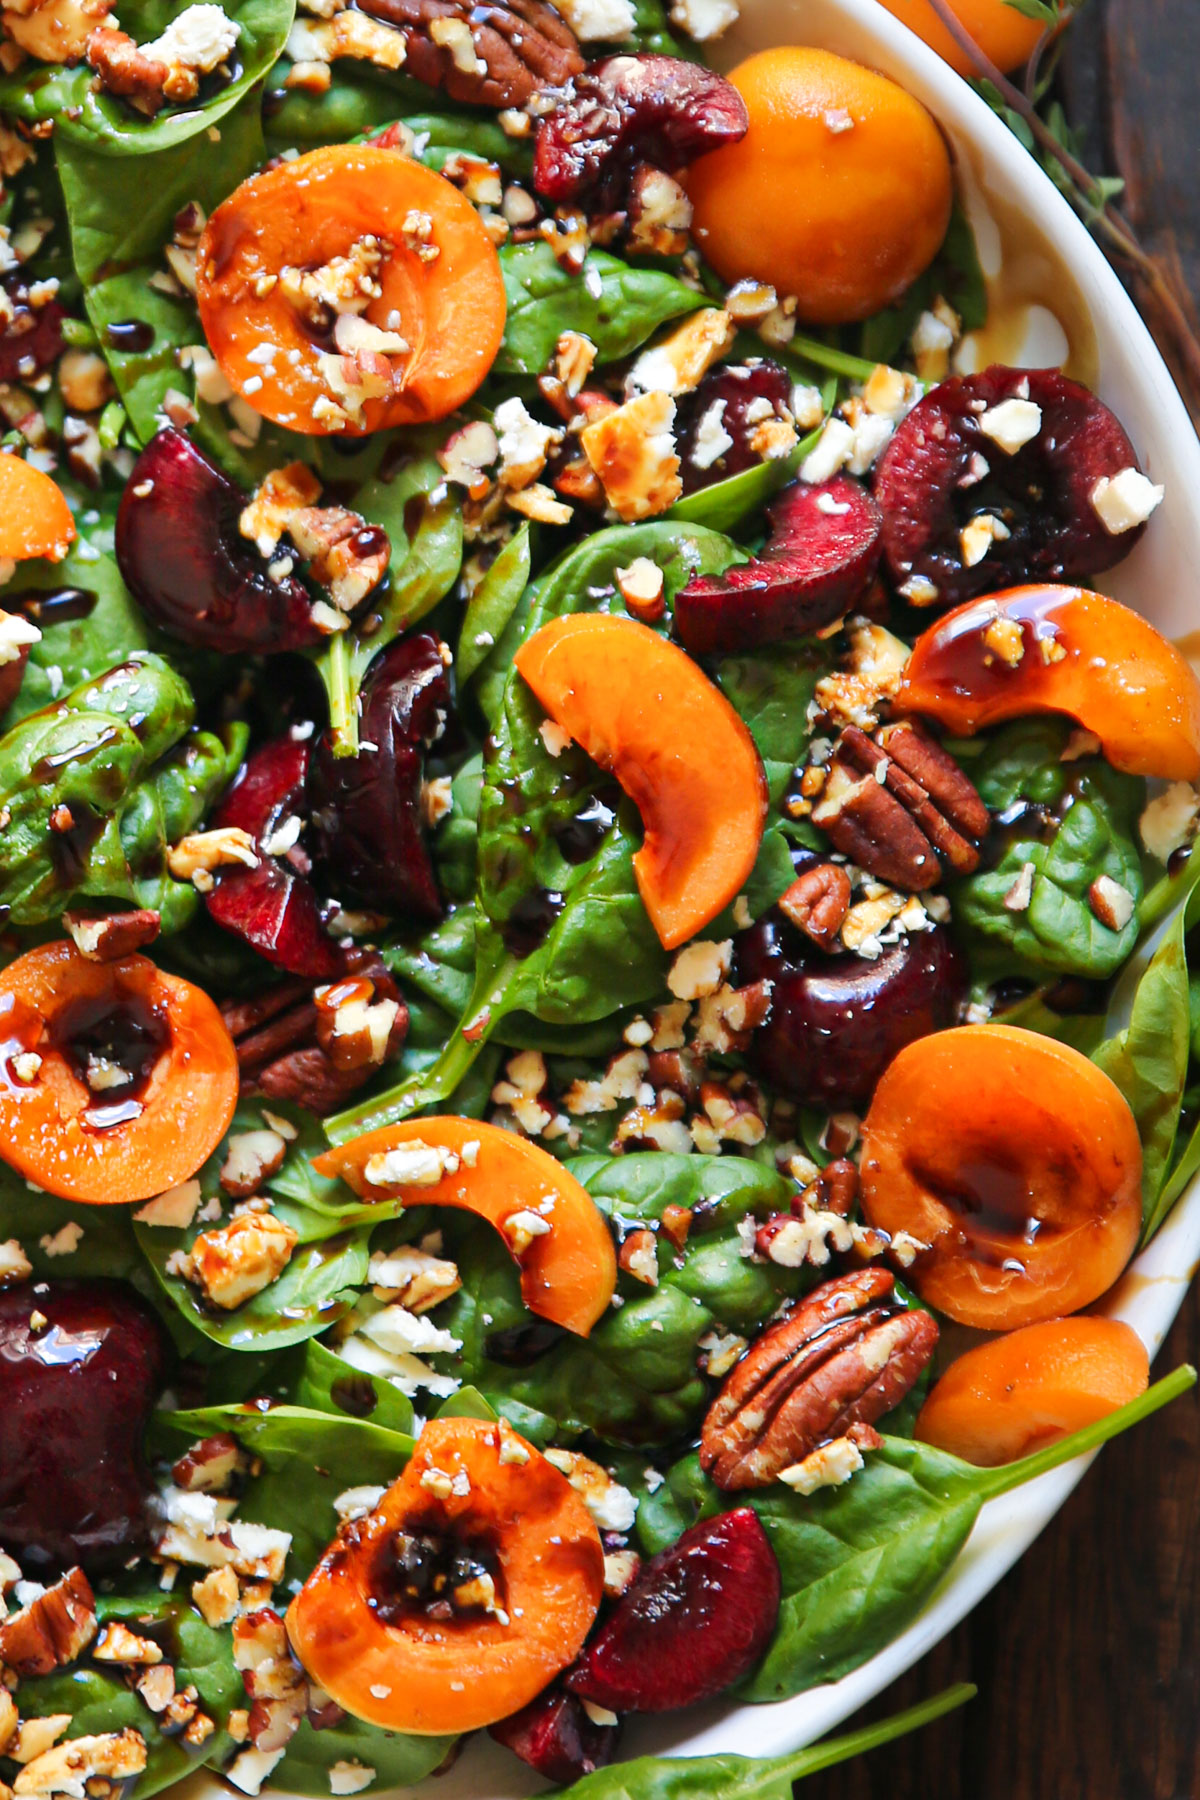 Apricot Salad with Spinach, Cherries, Pecans, Feta Cheese, and Balsamic Glaze - on a white plate.